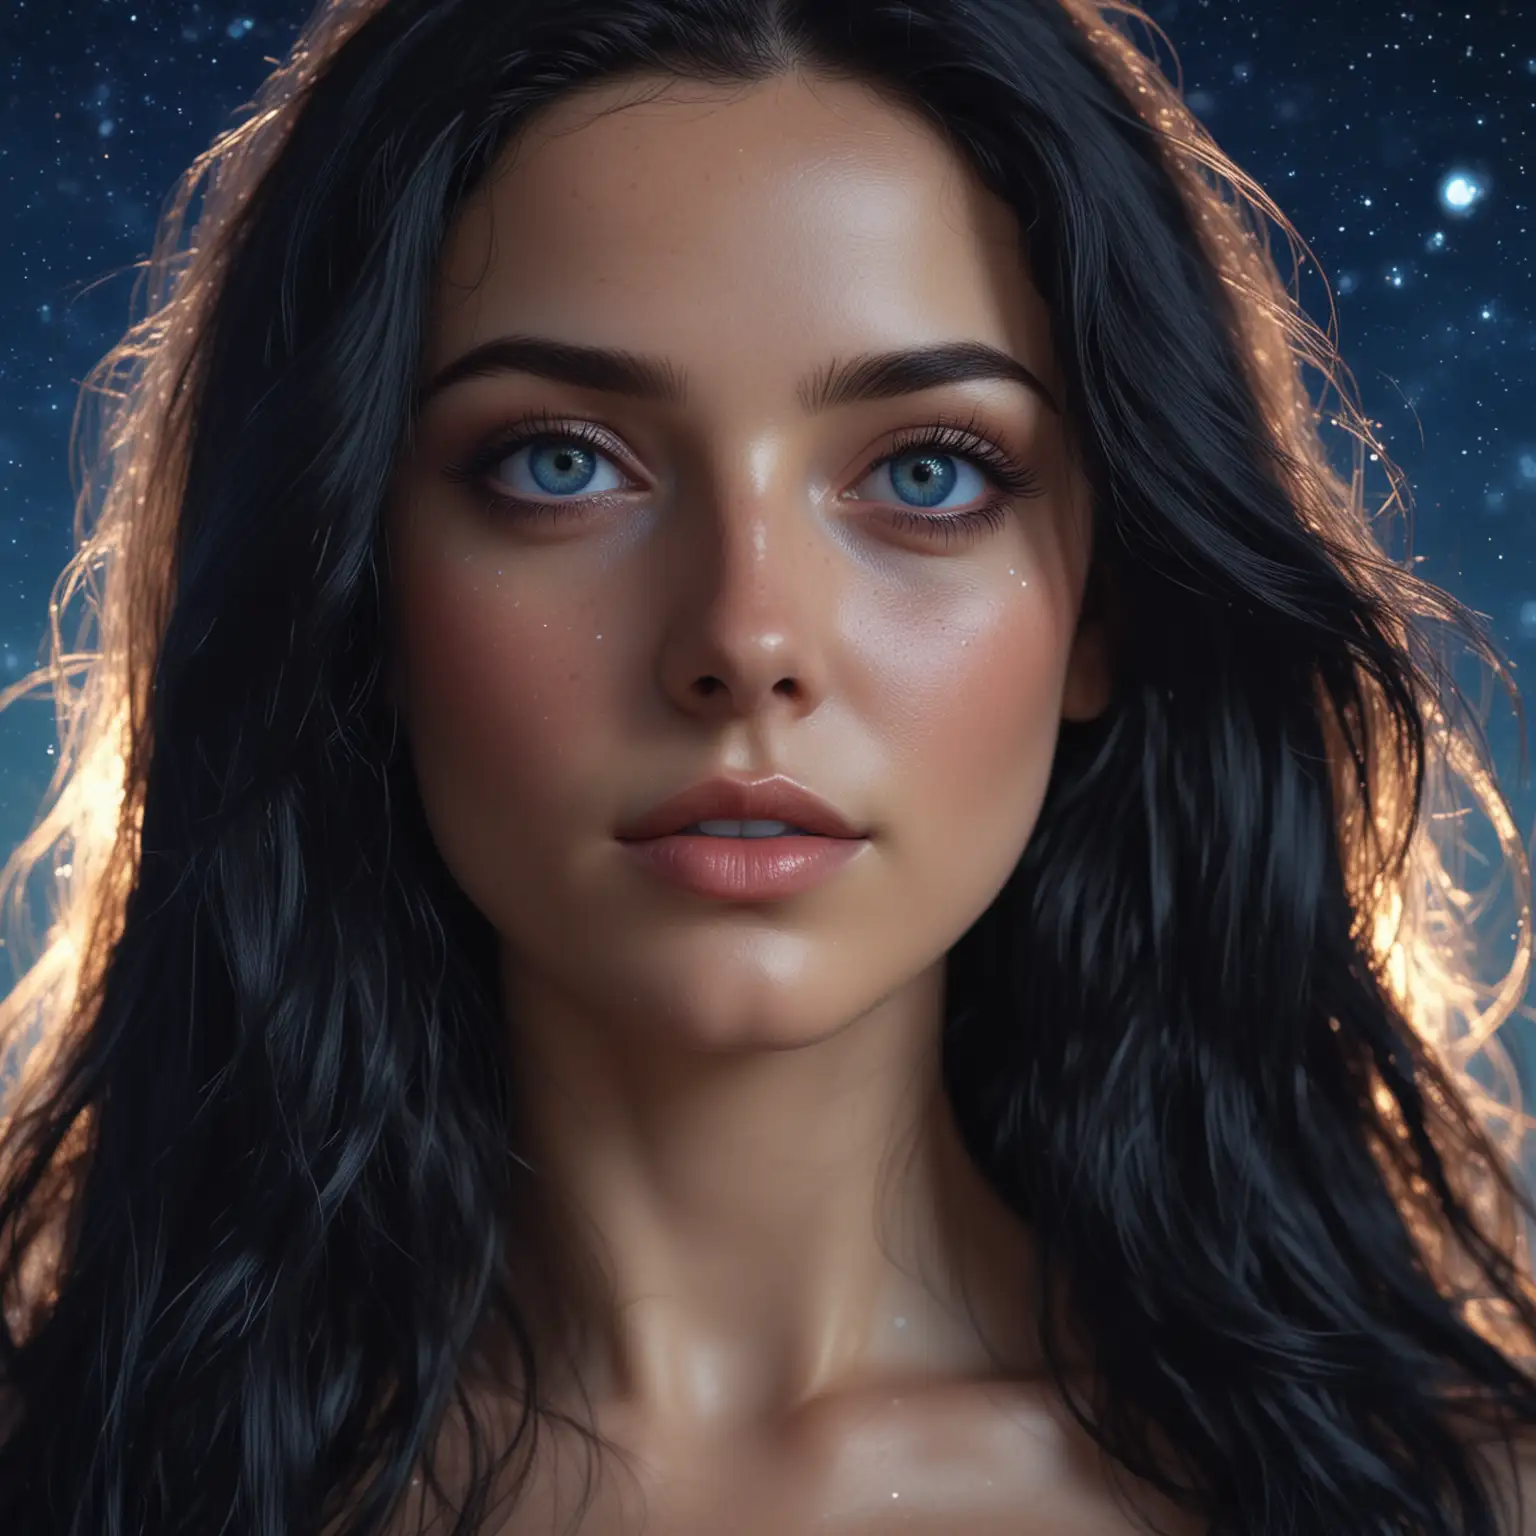 Captivating Goddess with Long Black Hair under Starry Sky